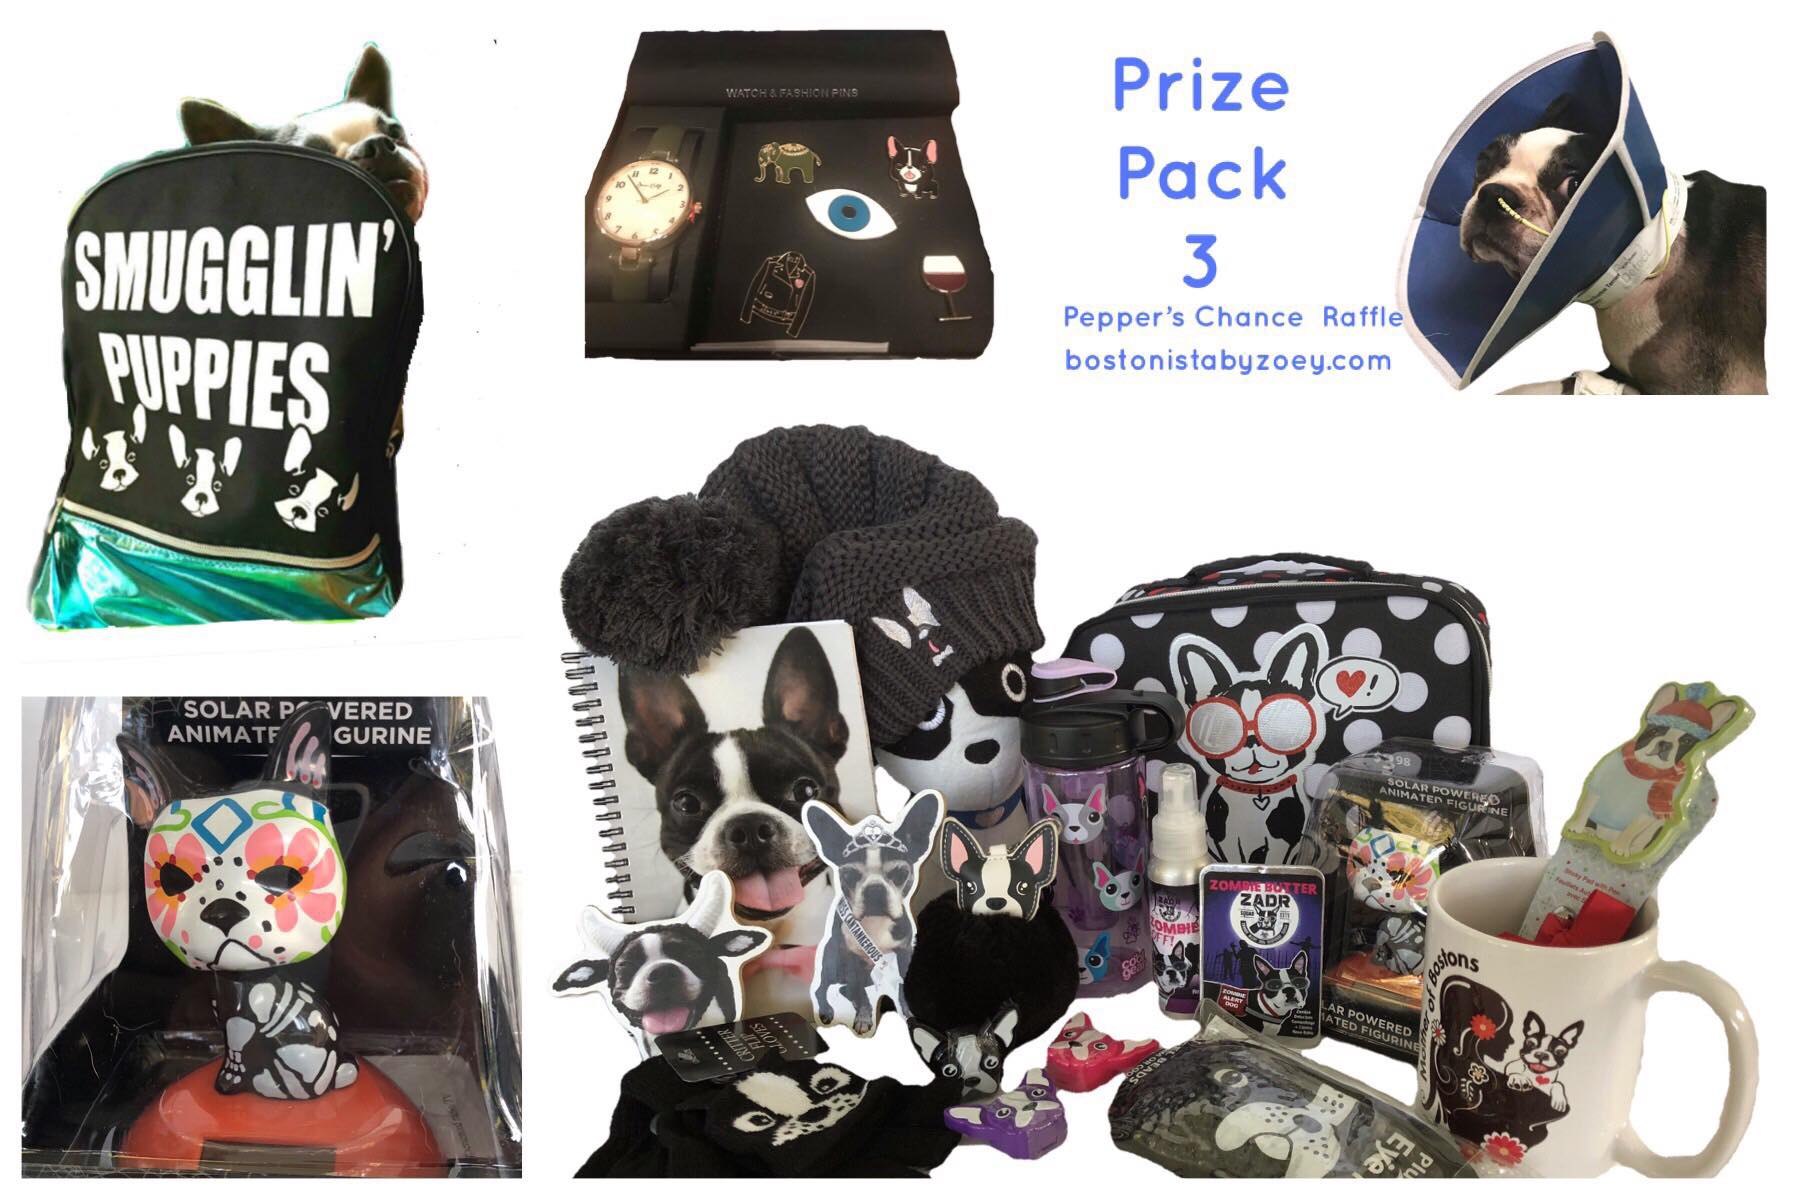 Prize Pack 3